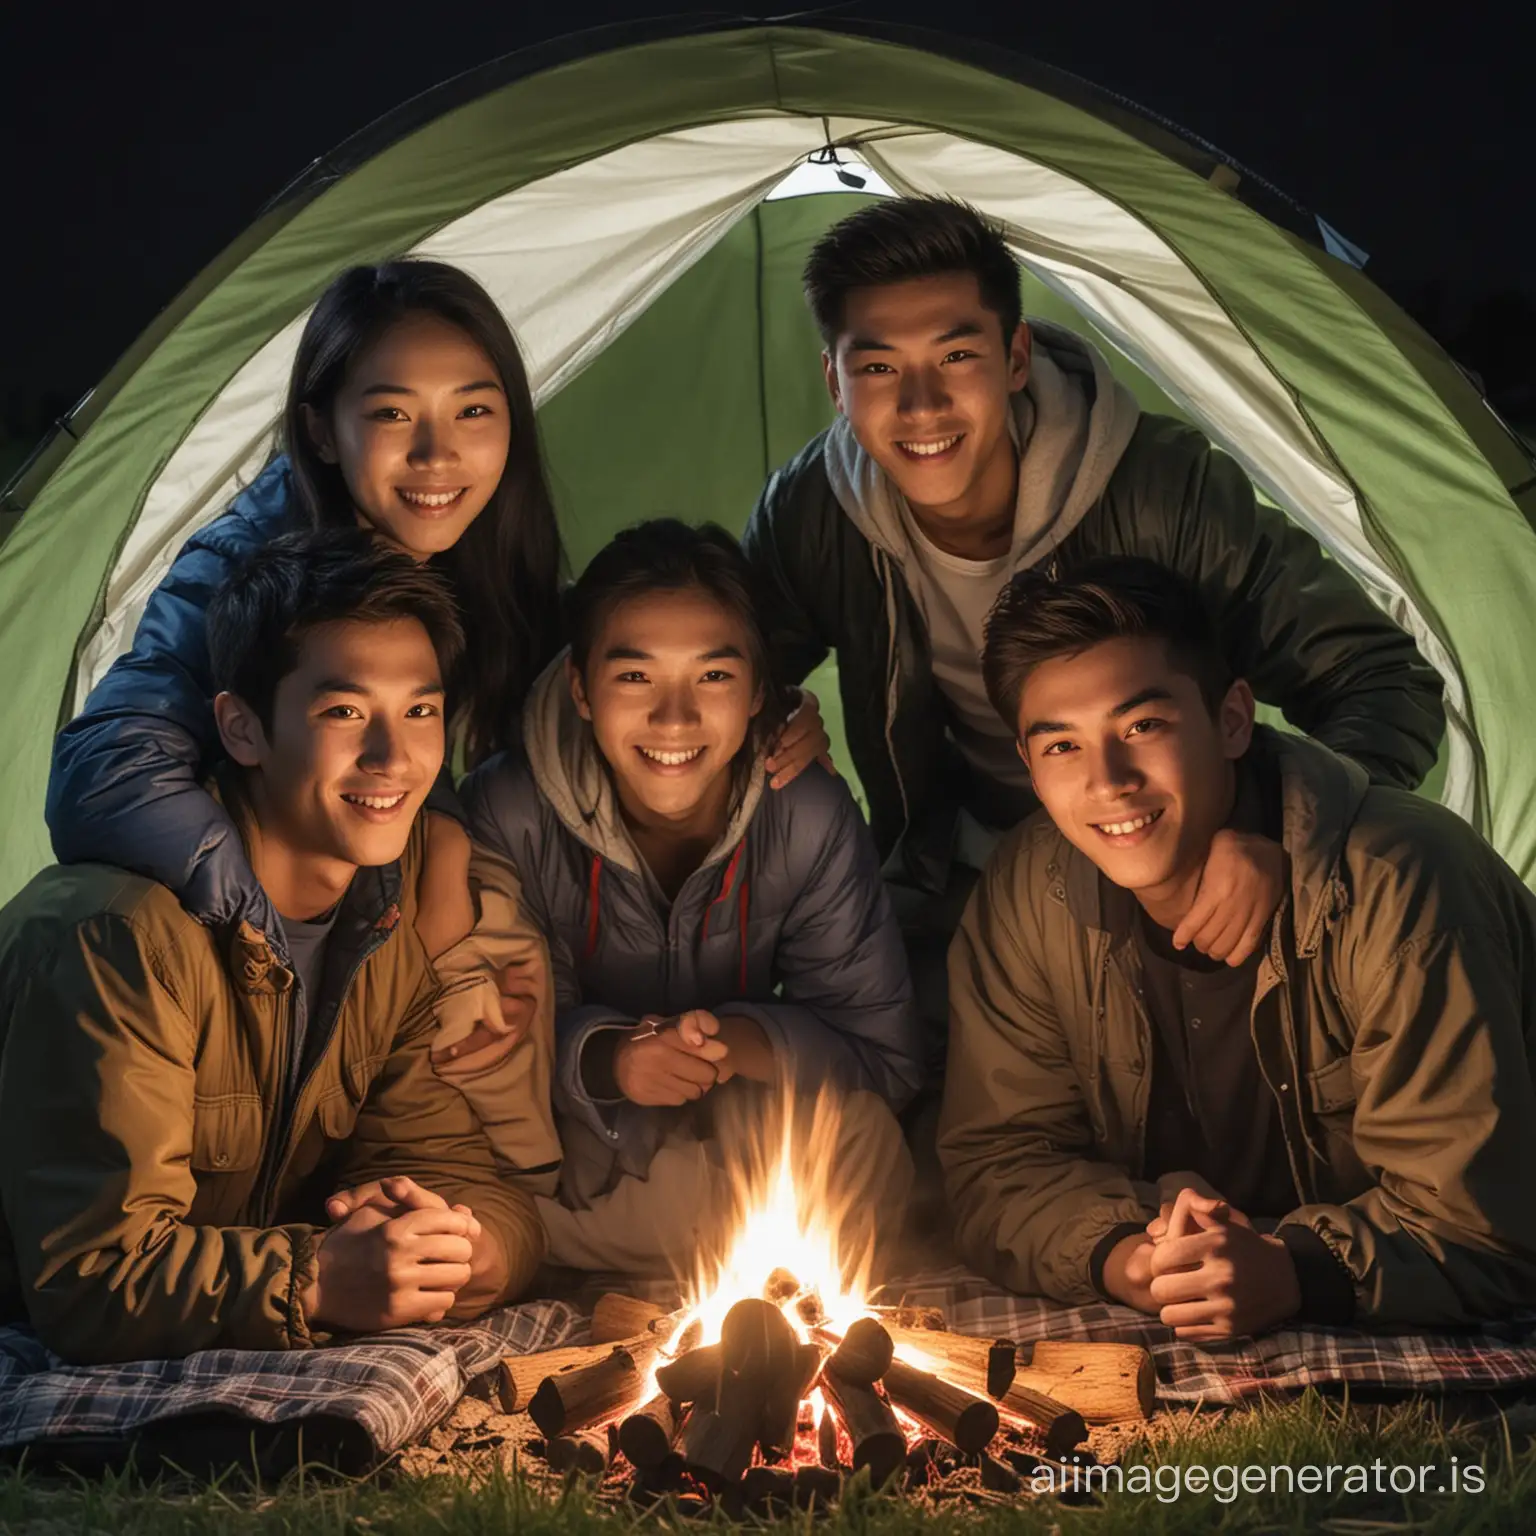 Happy european male teenager camping at night with an Asian family made up of  two Asian woman, 2 young boys/males and one Asian male teenager